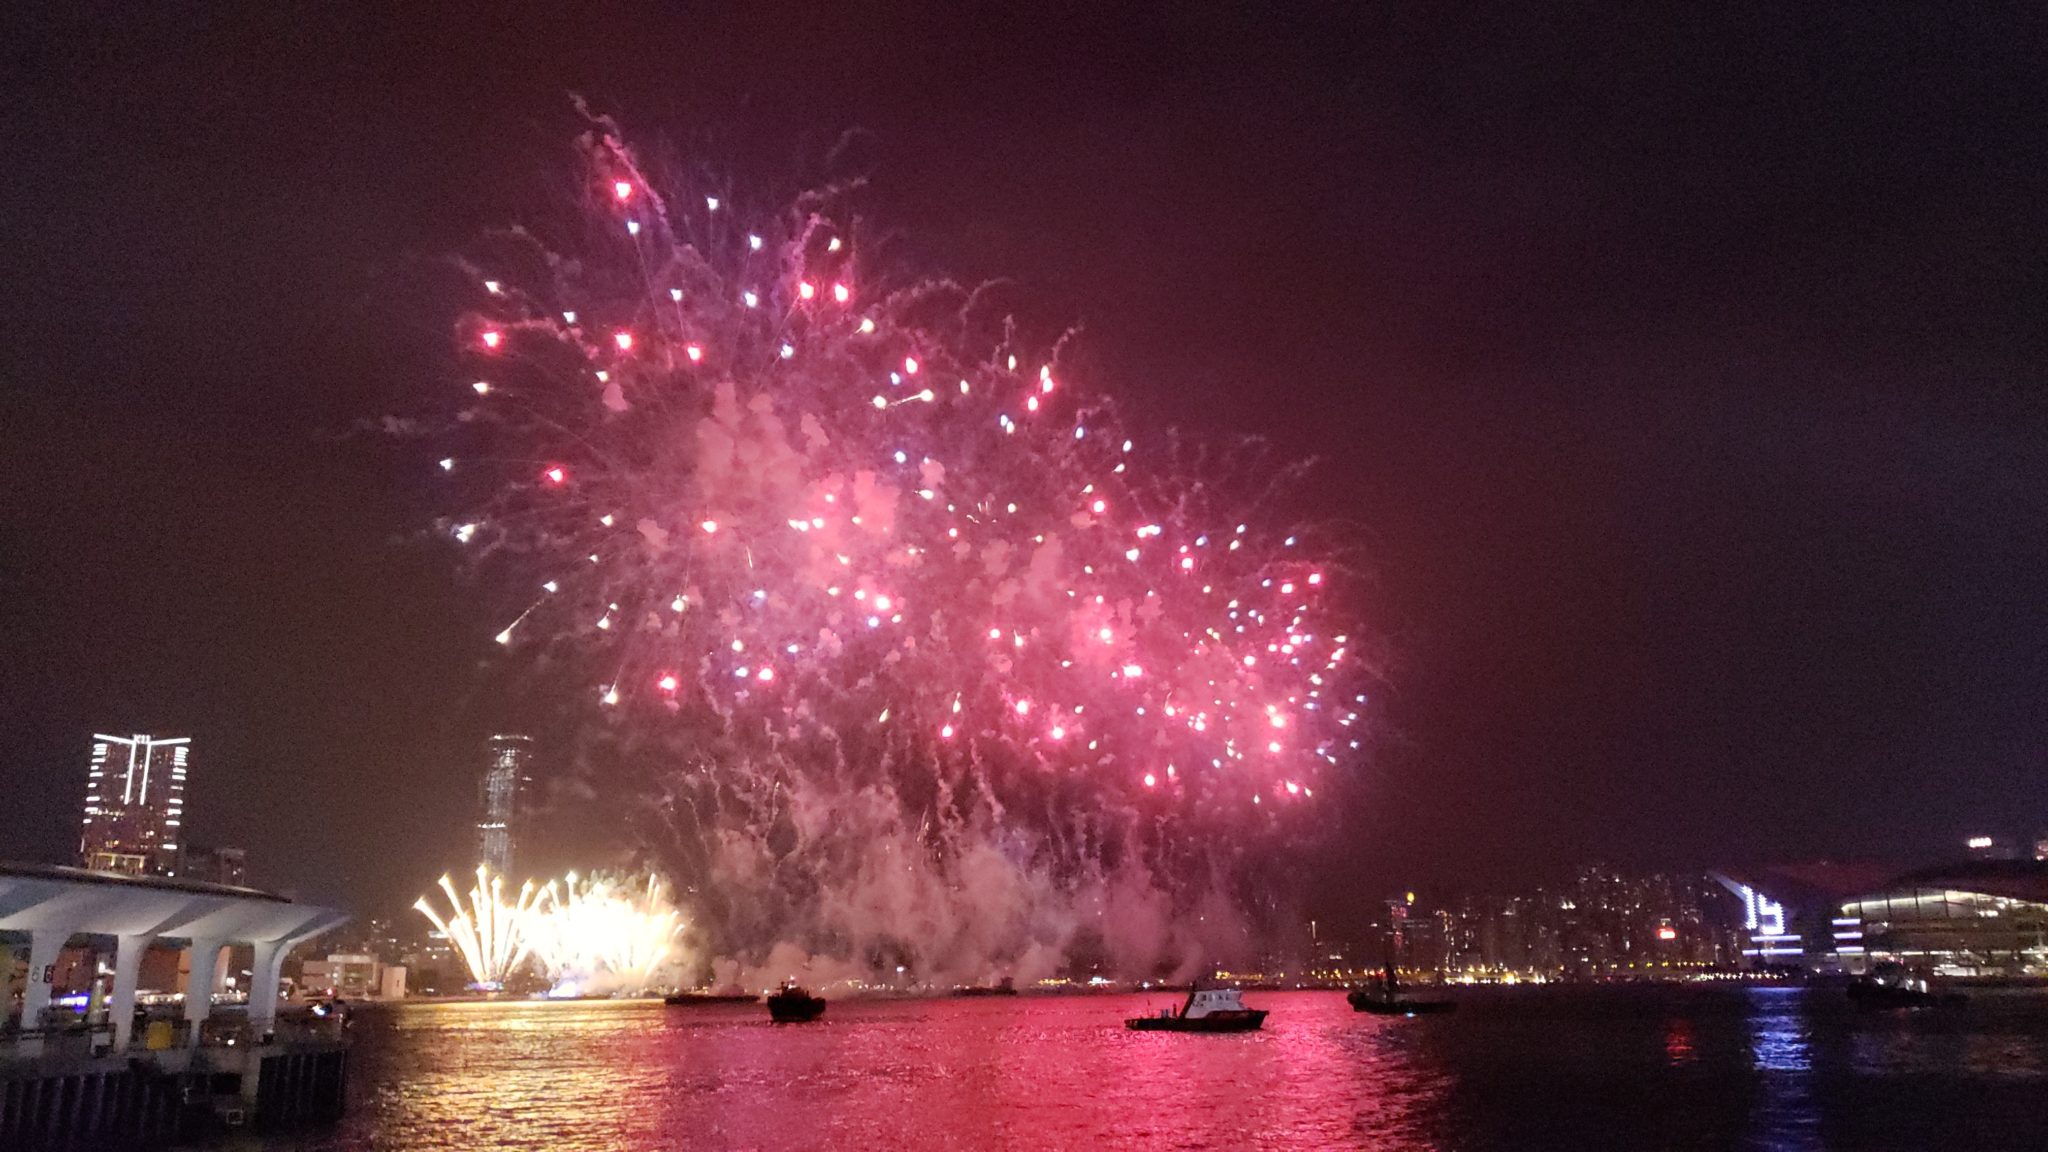 fireworks in the sky over water